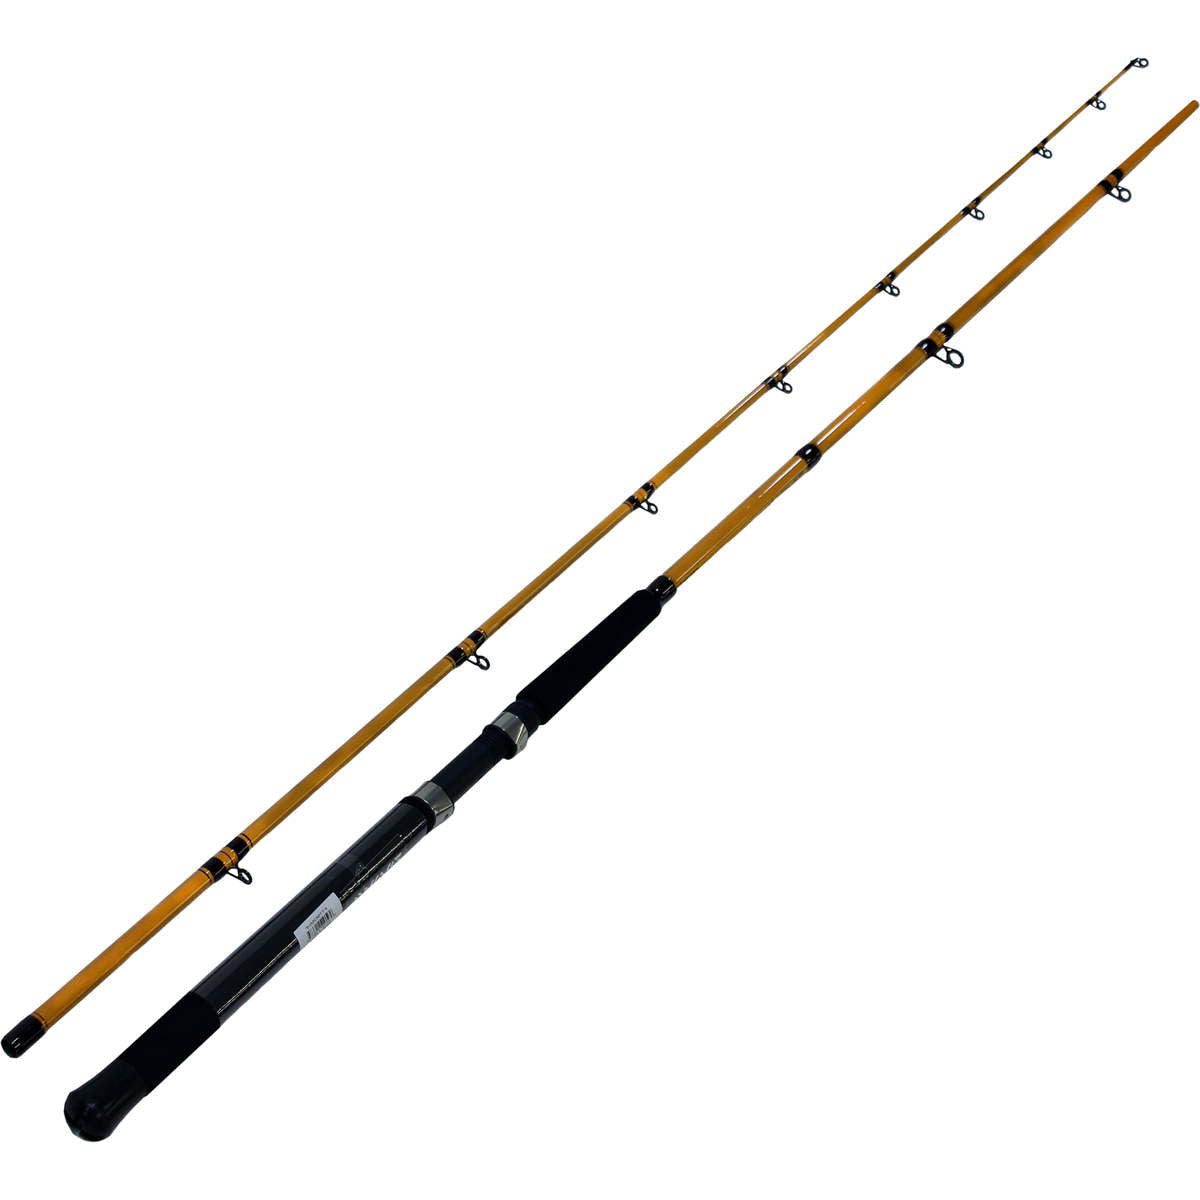 Photo of Daiwa FT Trolling Series Dipsey Diver Rod for sale at United Tackle Shops.